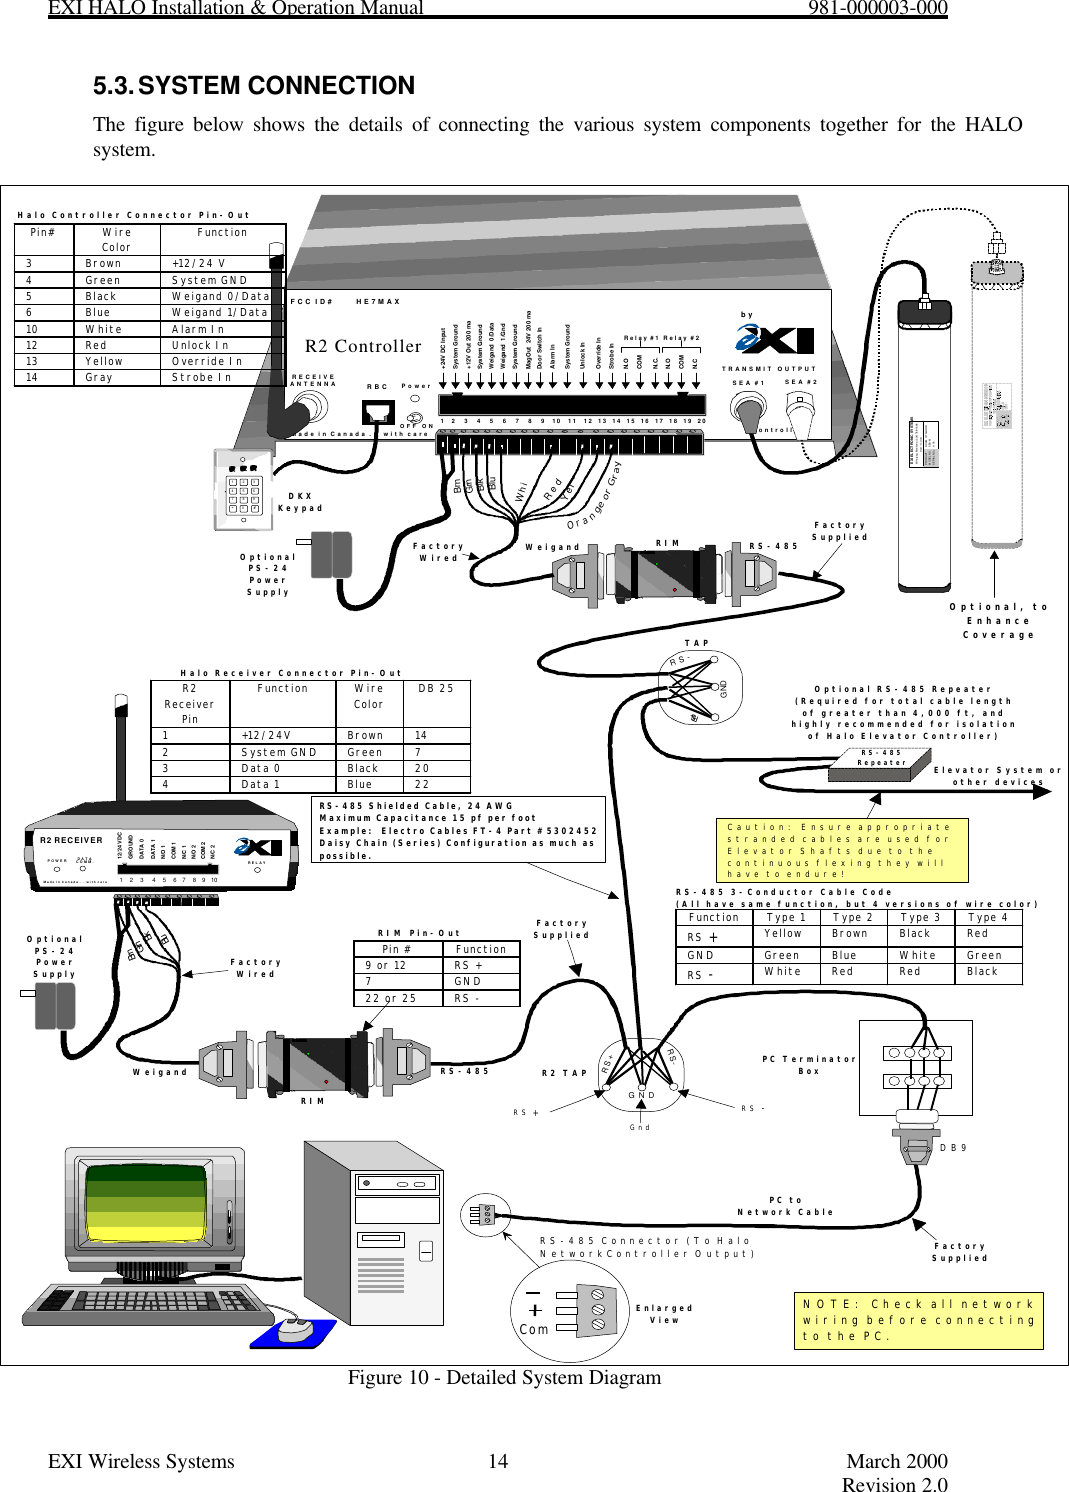 EXI HALO Installation &amp; Operation Manual                                                            981-000003-000EXI Wireless Systems 14 March 2000Revision 2.05.3. SYSTEM CONNECTIONThe figure below shows the details of connecting the various system components together for the HALOsystem.Figure 10 - Detailed System DiagramRECEIVEANTENNA RBCFCC ID#          HE7MAXTRANSMIT  OUTPUTSEA #1 SEA #2Made in Canada . .  with care ControllerbyPower1    2     3     4     5     6     7     8     9    10    11    12   13   14   15   16   17   18   19   20+24V DC InputSystem Ground+12V Out 200 maSystem GroundWeigand  0/DataWeigand  1/GndSystem GroundMagOut  24V 200 maDoor Switch InSystem GroundUnlock InOverride InStrobe InN.OCOMN.C.N.OCOMN.CRelay #1 Relay #2Alarm InOFF  ONR2 ControllerRS+RS-GNDRS+RS-GNDR2 RECEIVERDATACOMM.Made in Canada . .  with care12/24 VDCGROUNDDATA 0DATA 1N/O 1COM 1N/C 1N/O 2COM 2N/C 2POWER RELAY1    2    3     4    5    6   7    8   9   10DKXKeypadOptionalPS-24Power SupplyEXI ELECTRONIC SYSTEMSWinnipeg, Manitoba  (204) 788-1696Made in CanadaPRODUCTMODEL NO.SERIAL NO&gt;ROAM  II/TAGRRRSEA-M1118BrnRIMGrnBlkBluWhiRedYel1 2 34 5 67 8 9*0#GrnBlkBluRIMR2 TAPPC TerminatorBoxPC to Network CableRS-485WeigandBrnPin# Wire Color Function 3 Brown +12/24 V 4 Green System GND 5 Black Weigand 0/Data 6 Blue Weigand 1/Data 10 White Alarm In 12 Red Unlock In 13 Yellow Override In 14 Gray Strobe In  FactoryWiredFactoryWiredRS-485 Shielded Cable, 24 AWGMaximum Capacitance 15 pf per footExample:  Electro Cables FT-4 Part #5302452Daisy Chain (Series) Configuration as much aspossible.RS-485 Connector (To Halo NetworkController Output)DB9R2 Receiver Pin  Function Wire Color DB 25 1 +12/24V Brown 14 2 System GND Green 7 3 Data 0 Black 20 4 Data 1 Blue 22  TAPOptionalPS-24Power SupplyPin #  Function 9 or 12 RS + 7 GND 22 or 25 RS -  RIM Pin-OutComNOTE:  Check all networkwiring before connectingto the PC.EnlargedViewRS +GndRS -Caution:  Ensure appropriatestranded cables are used for Elevator Shafts due to thecontinuous flexing they willhave to endure!FactorySuppliedFactorySuppliedRS-485WeigandFactorySuppliedOptional RS-485 Repeater(Required for total cable lengthof greater than 4,000 ft, and highly recommended for isolation of Halo Elevator Controller)RS-485RepeaterHalo Receiver Connector Pin-OutHalo Controller Connector Pin-OutOptional, toEnhance CoverageElevator System orother devicesFunction Type 1 Type 2 Type 3 Type 4 RS + Yellow Brown Black Red GND Green Blue White Green RS - White Red Red Black  RS-485 3-Conductor Cable Code(All have same function, but 4 versions of wire color)Orange or Gray